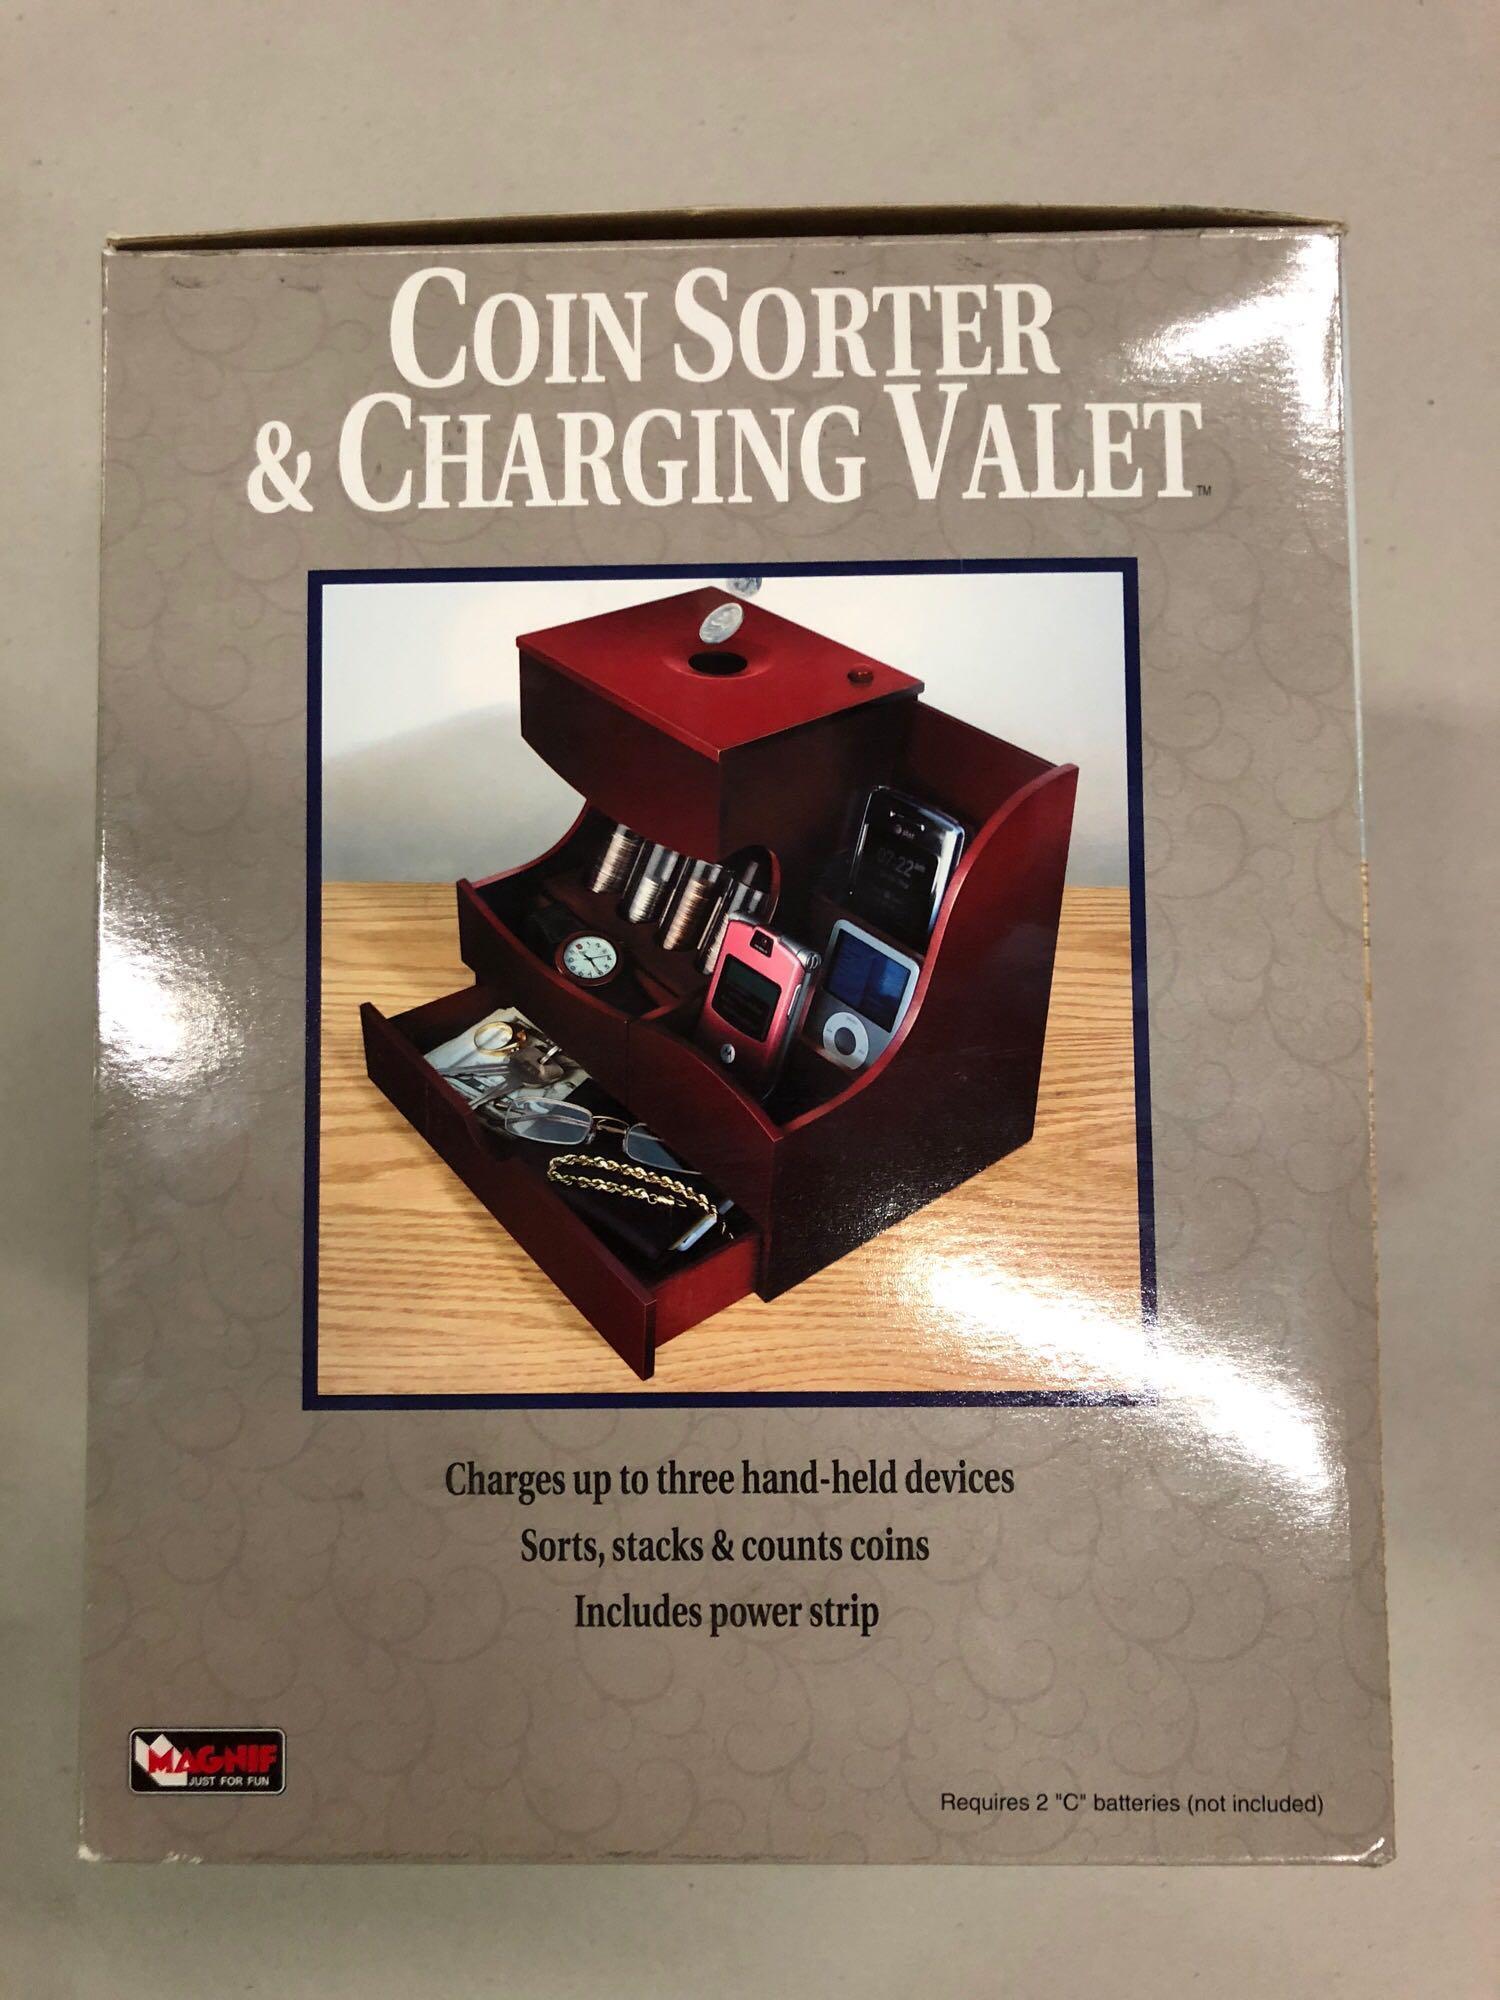 Coin Sorter & Charging Valet (Charges up to 3 handheld devices, sorts, stacks & counts coins,